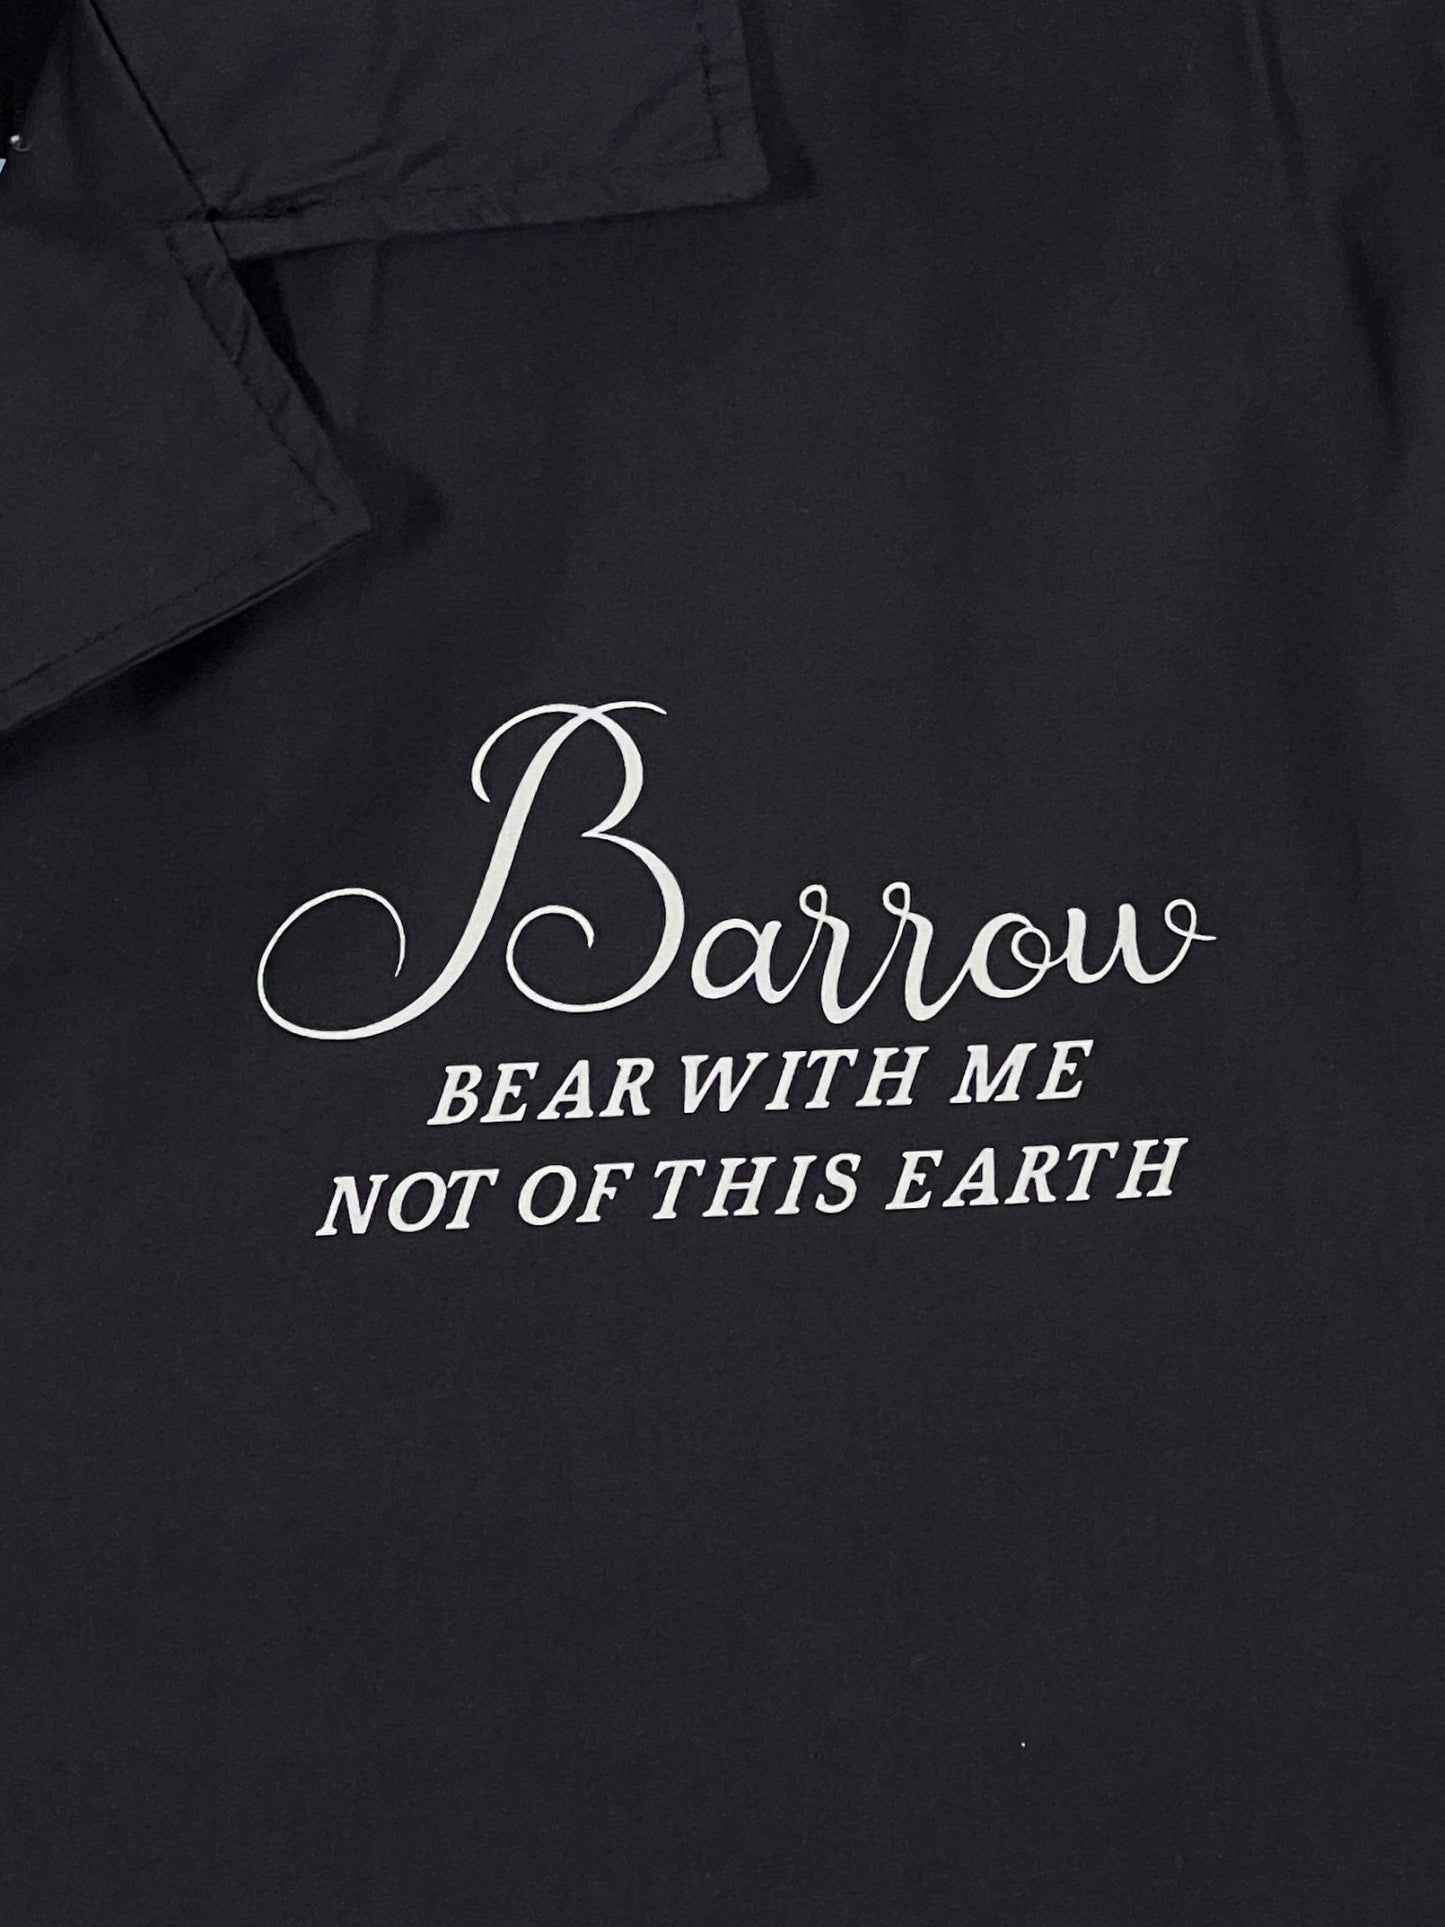 BARROW S4BWUASI059 POPELINE SHIRT UNISEX with white cursive and block lettering that reads "barrow - bear with me - not of this earth".